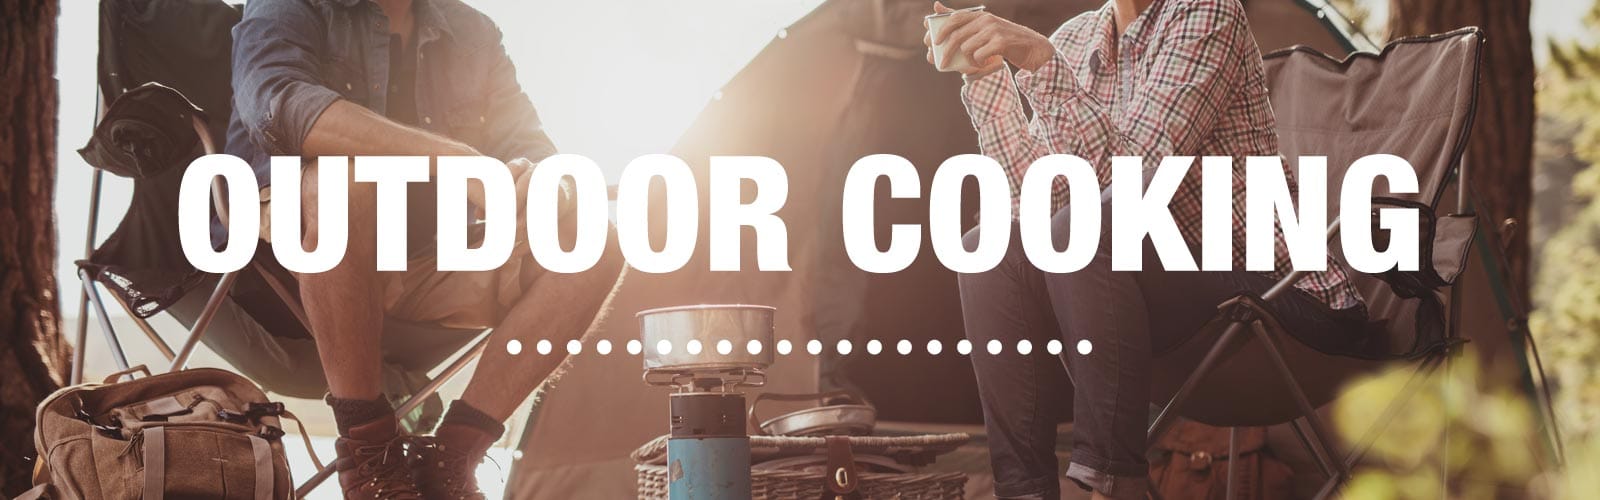 The Outdoor Cooking Guide